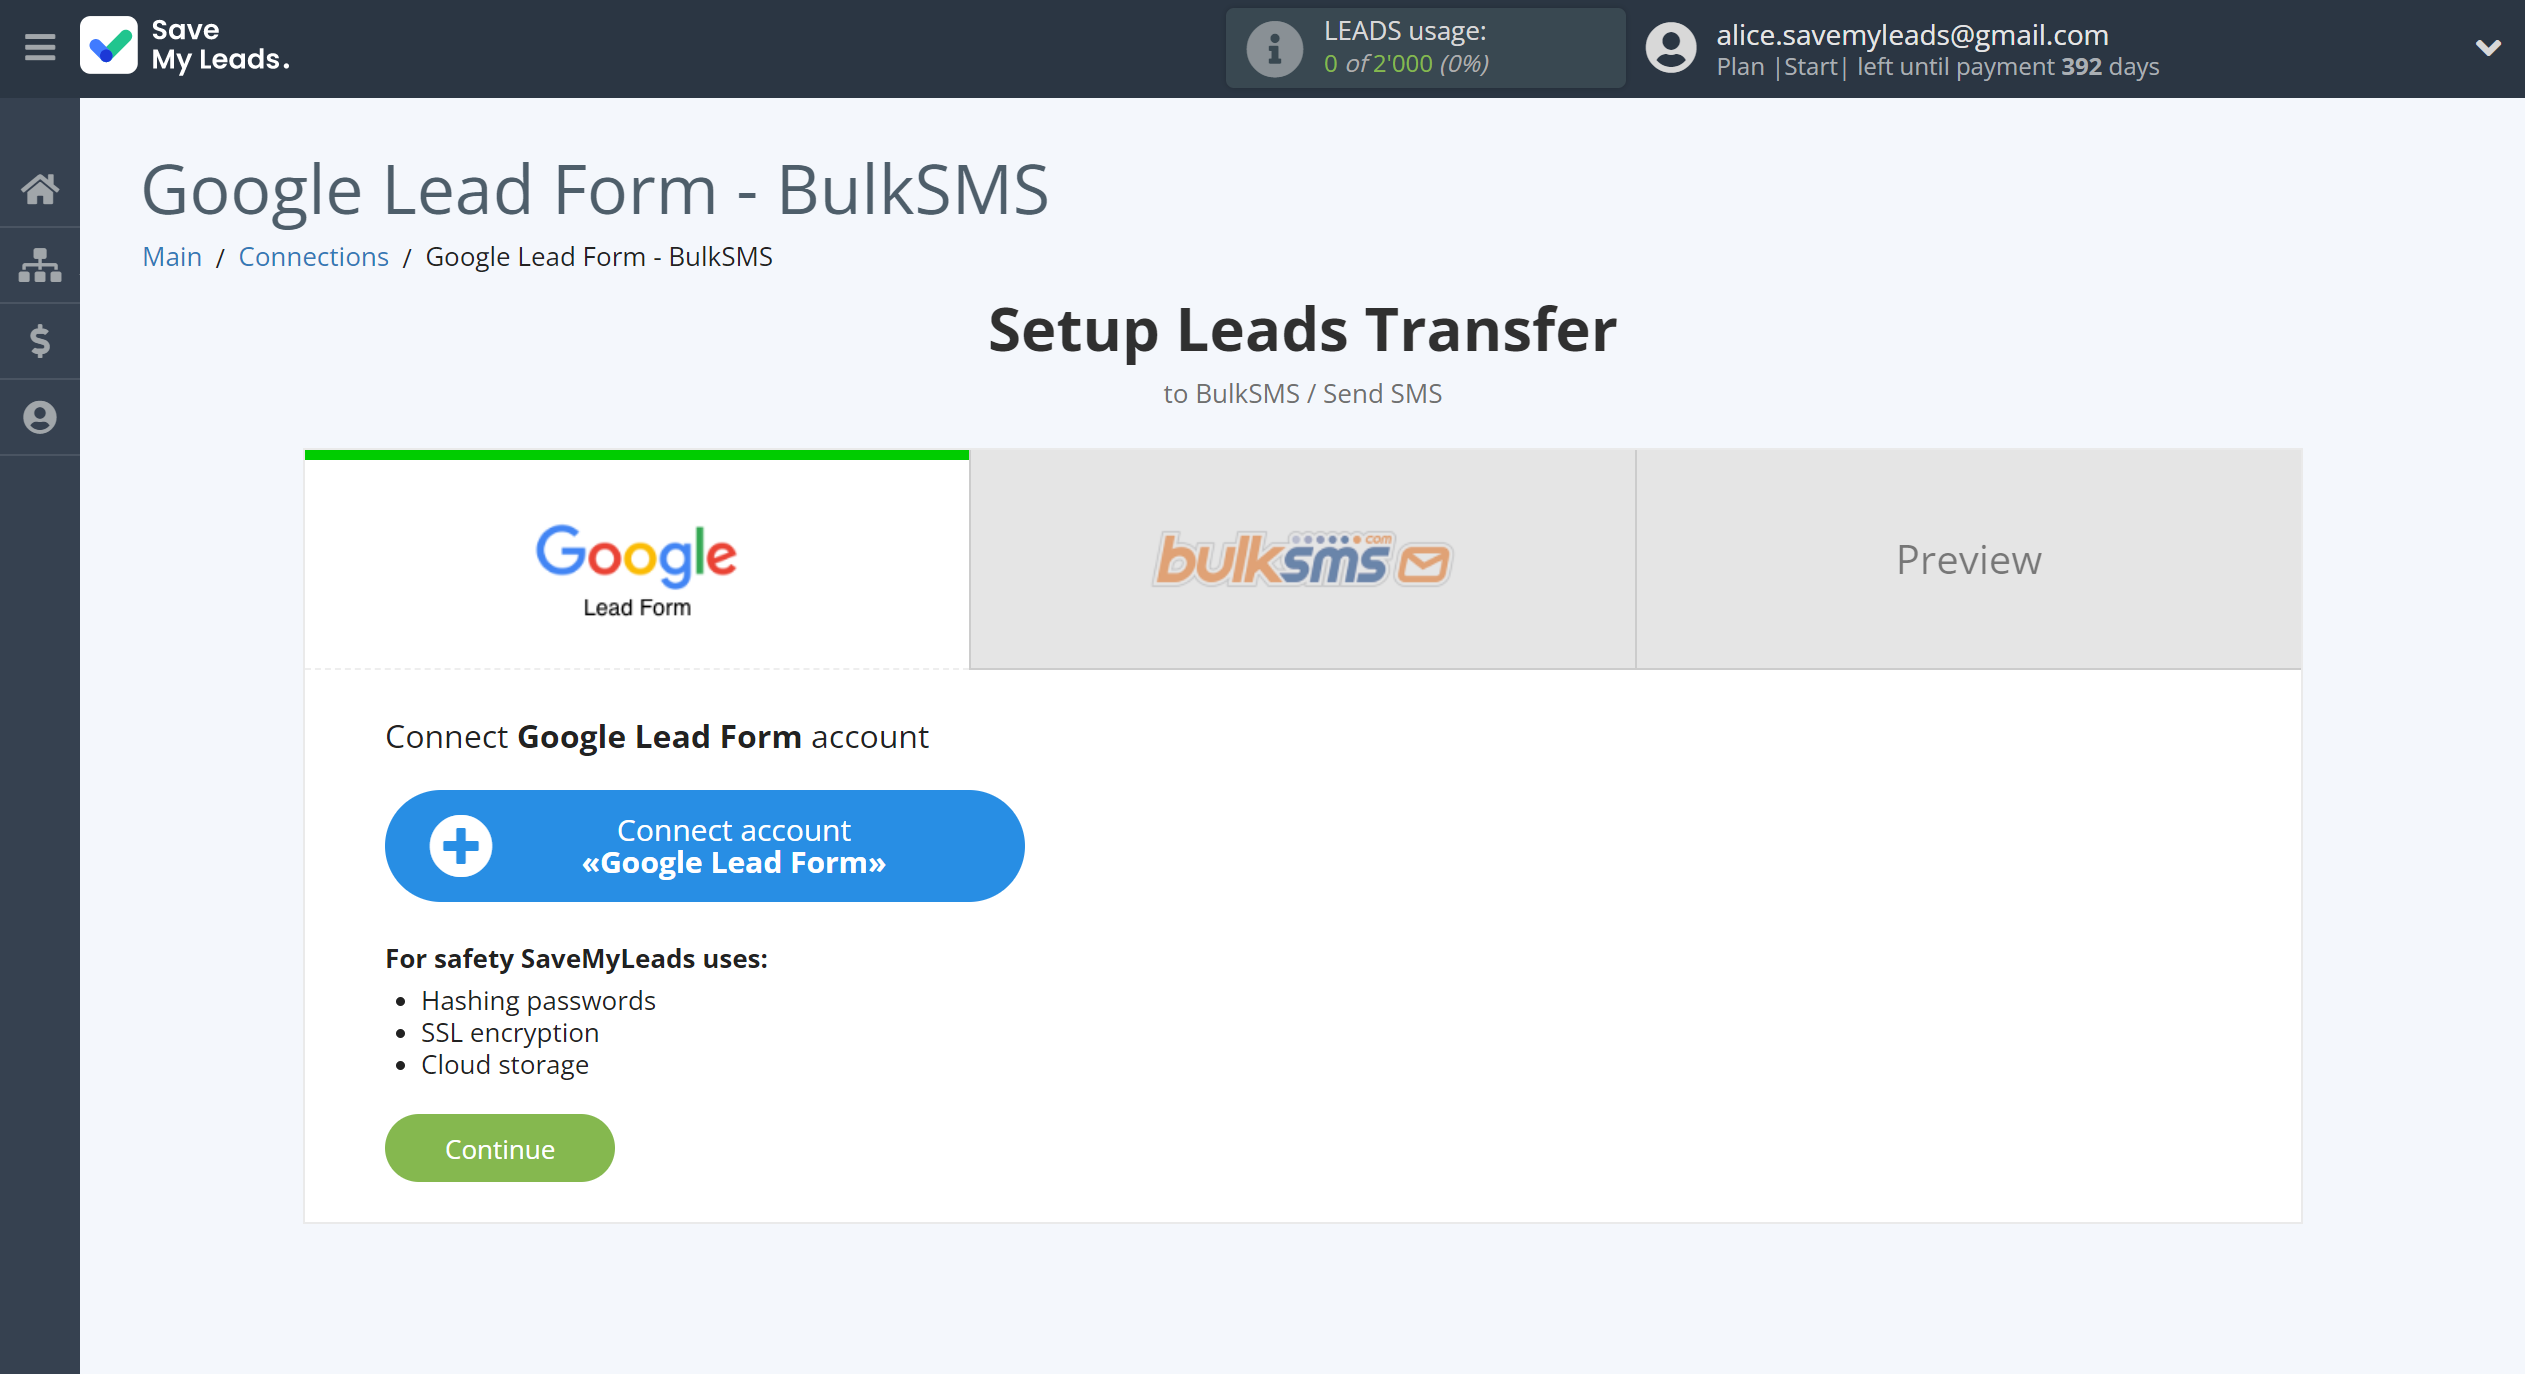 How to Connect Google Lead Form with BulkSMS | Data Source account connection